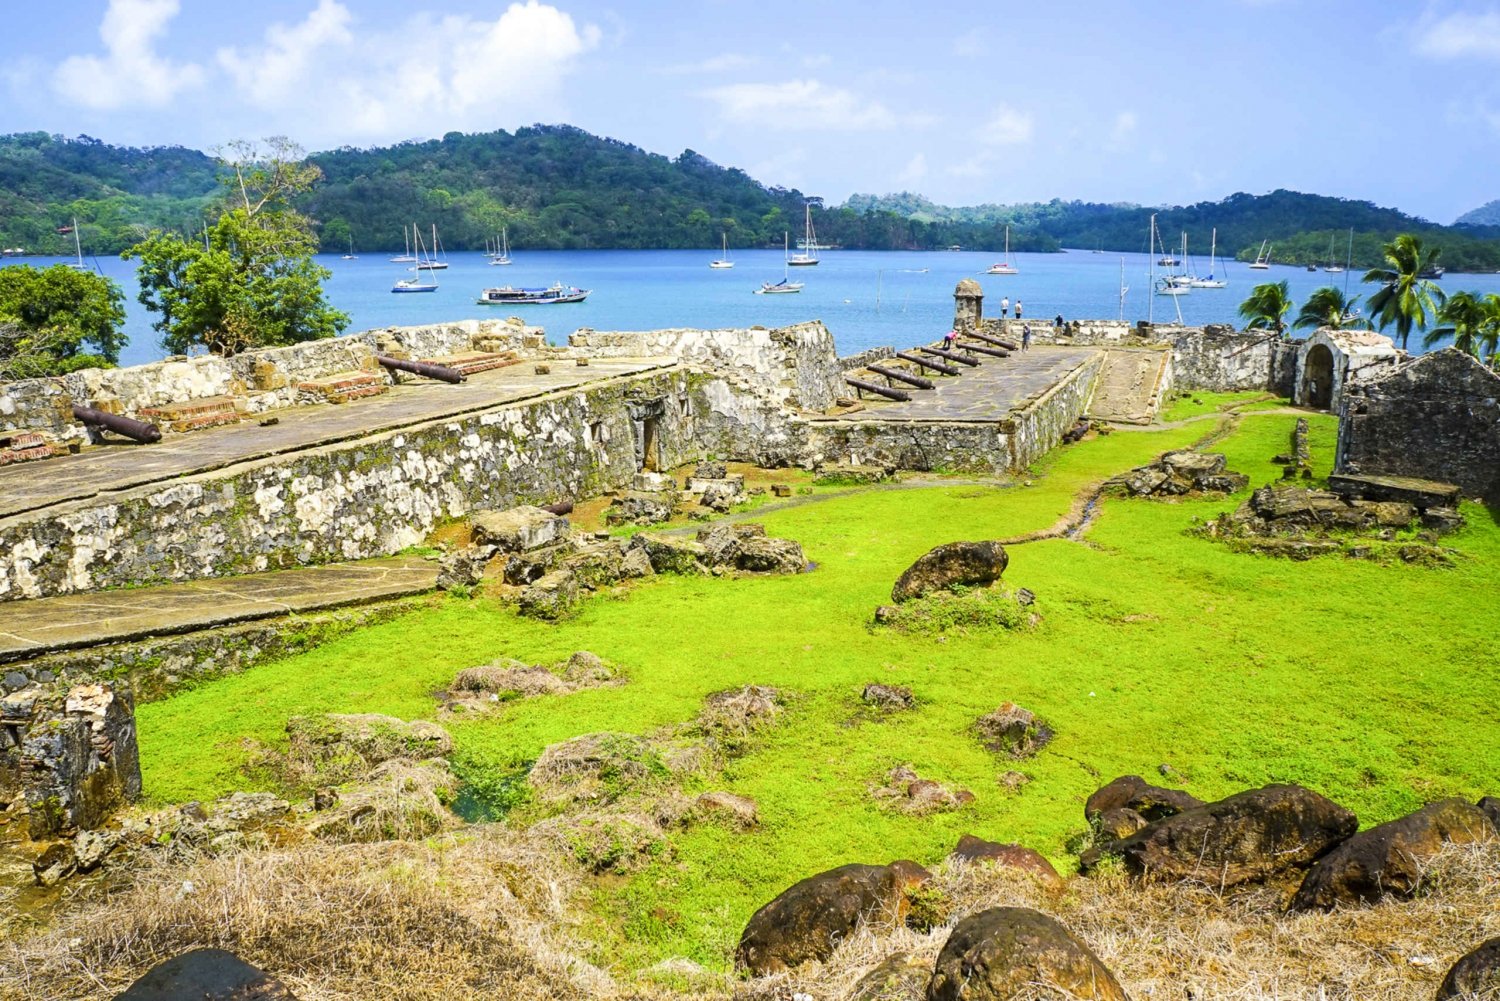 Best Tours of Panama Canal